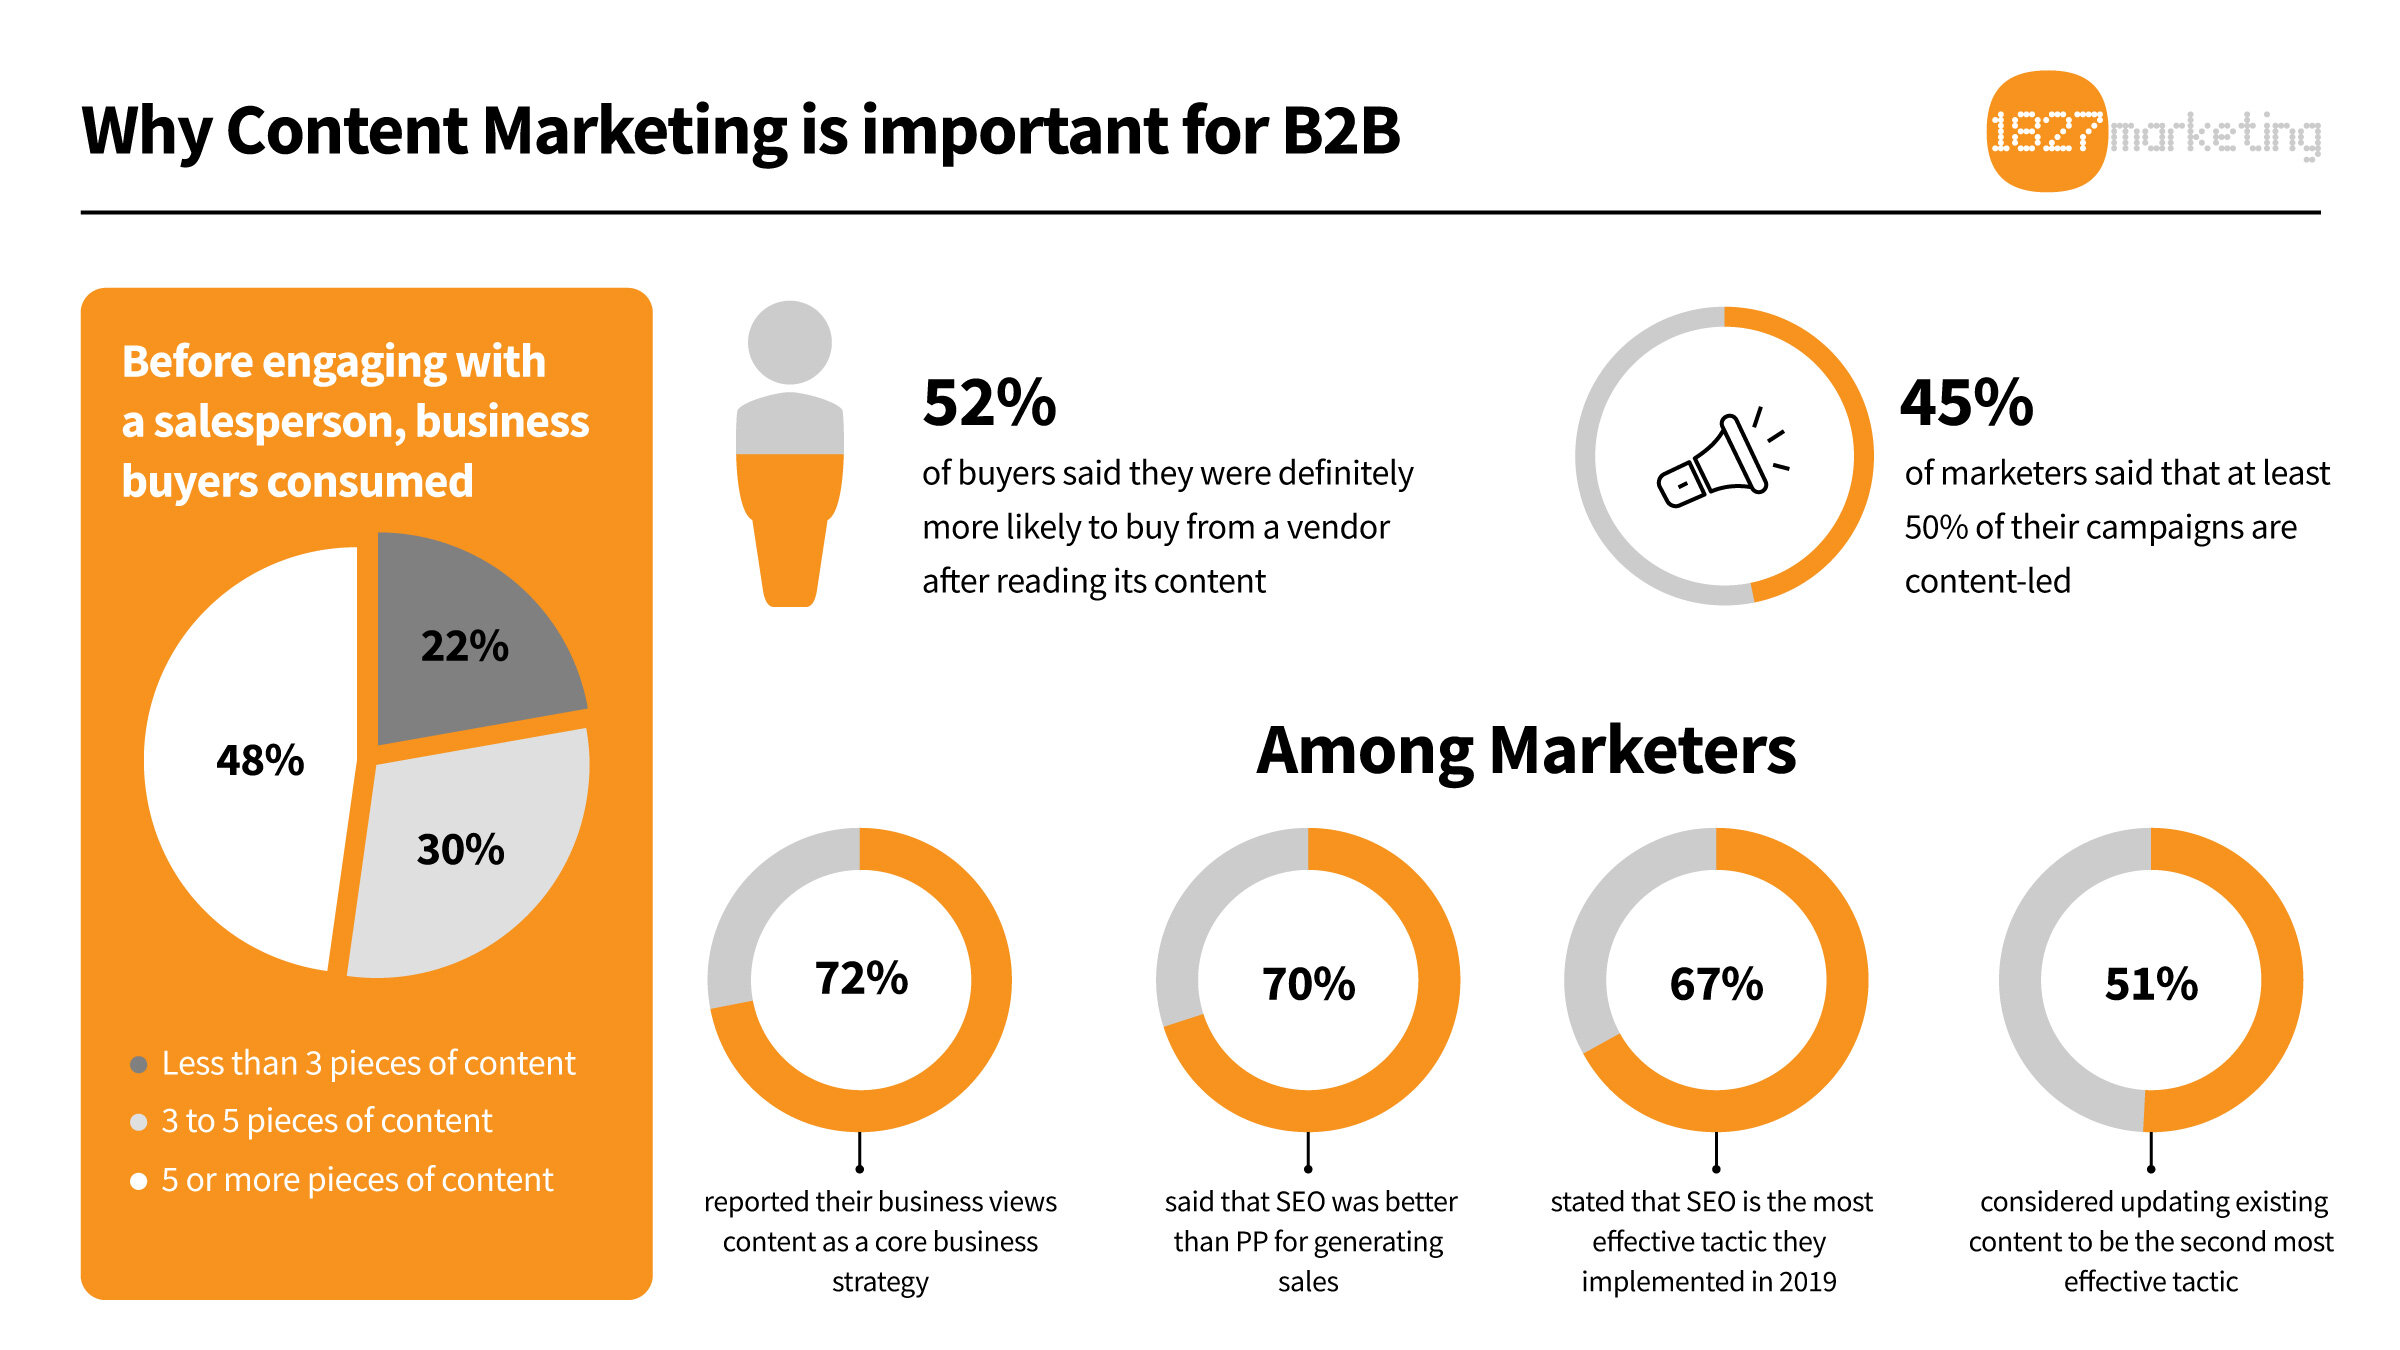 45% of B2B marketers say content represents 50% of their campaigns. Content campaign planning can improve marketing success.